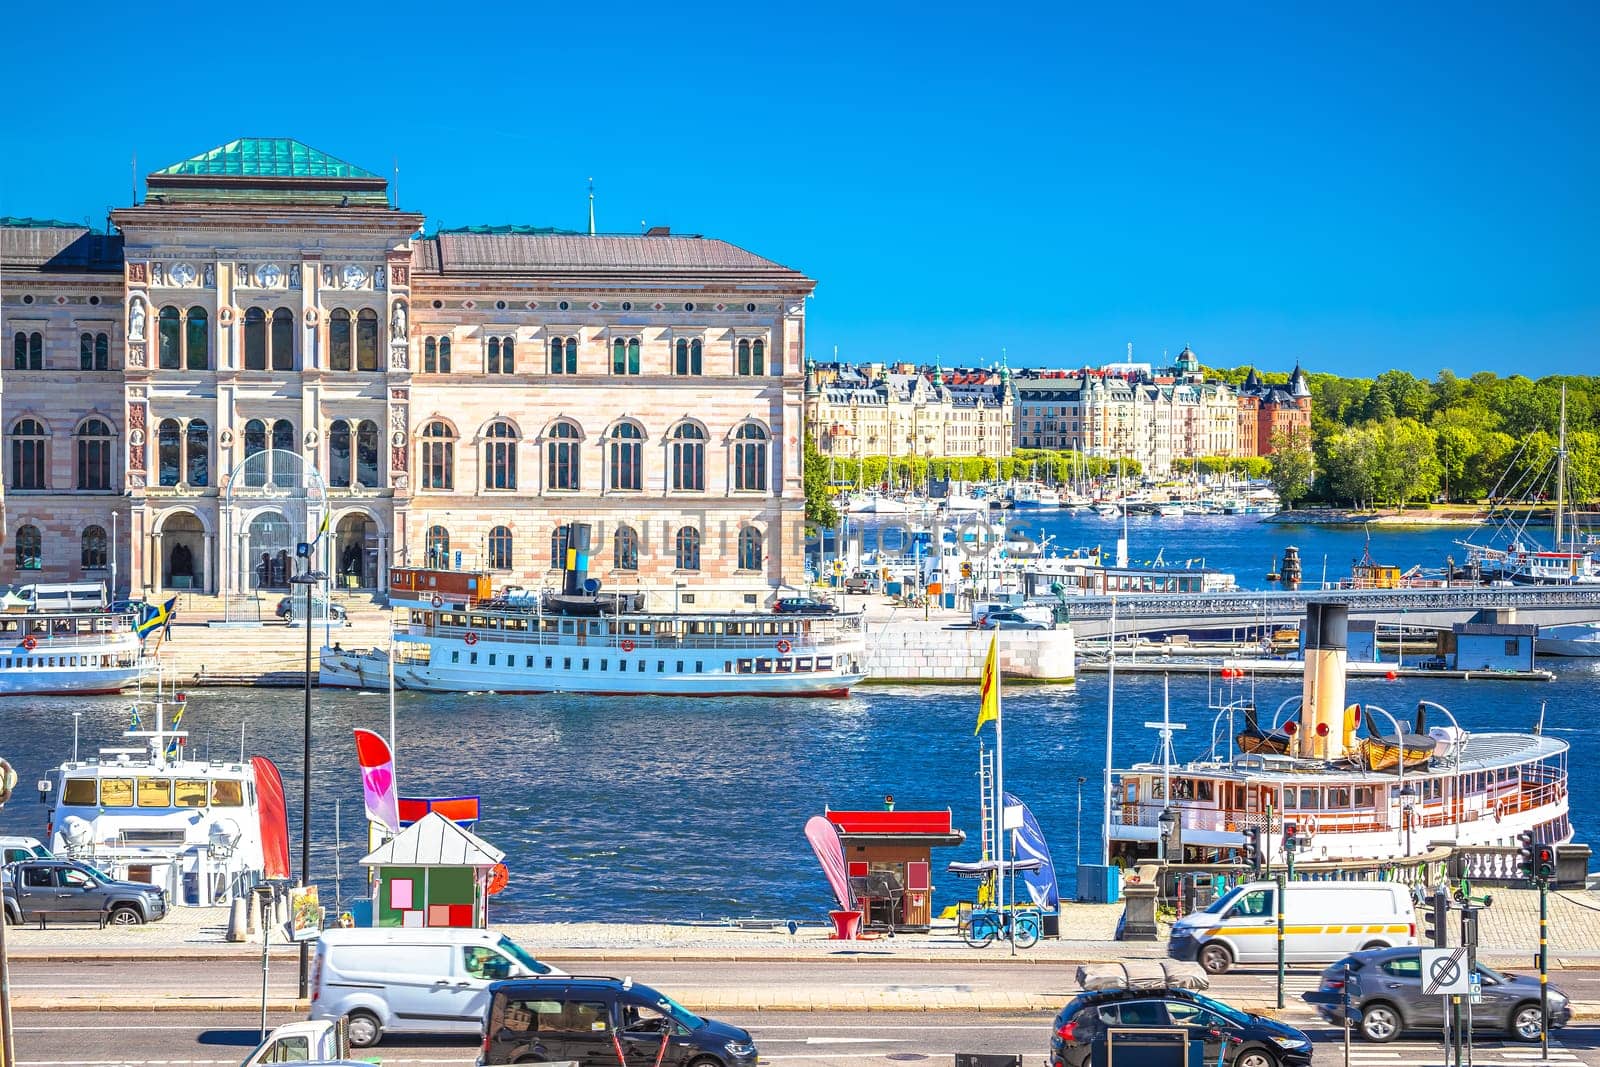 Stockholm harbor and waterfront of Sodermalm island view, capital of Sweden